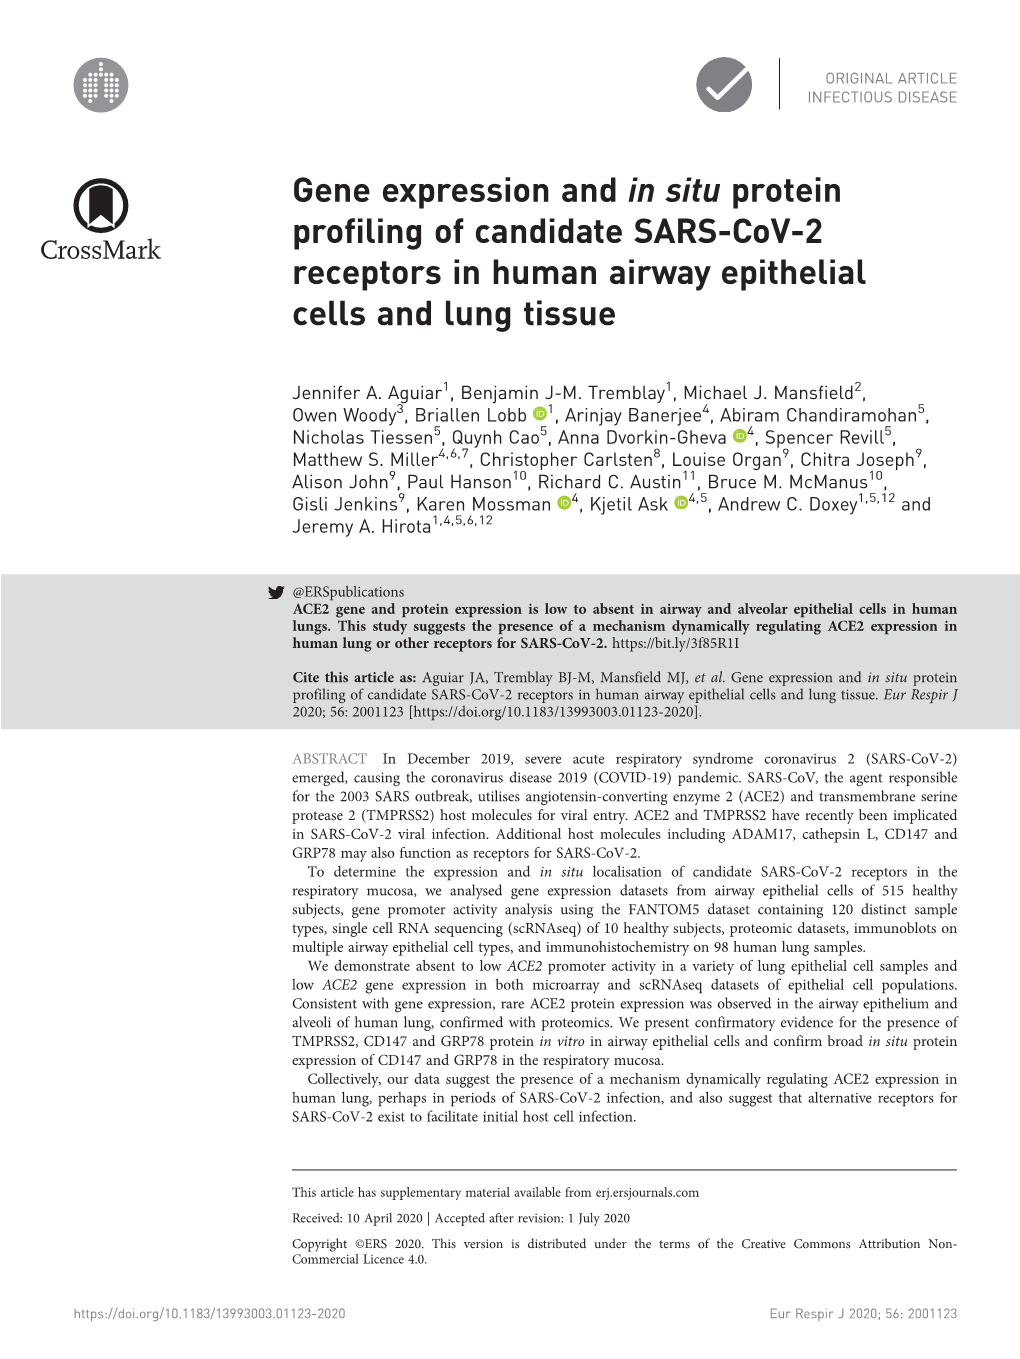 Gene Expression and in Situ Protein Profiling of Candidate SARS-Cov-2 Receptors in Human Airway Epithelial Cells and Lung Tissue